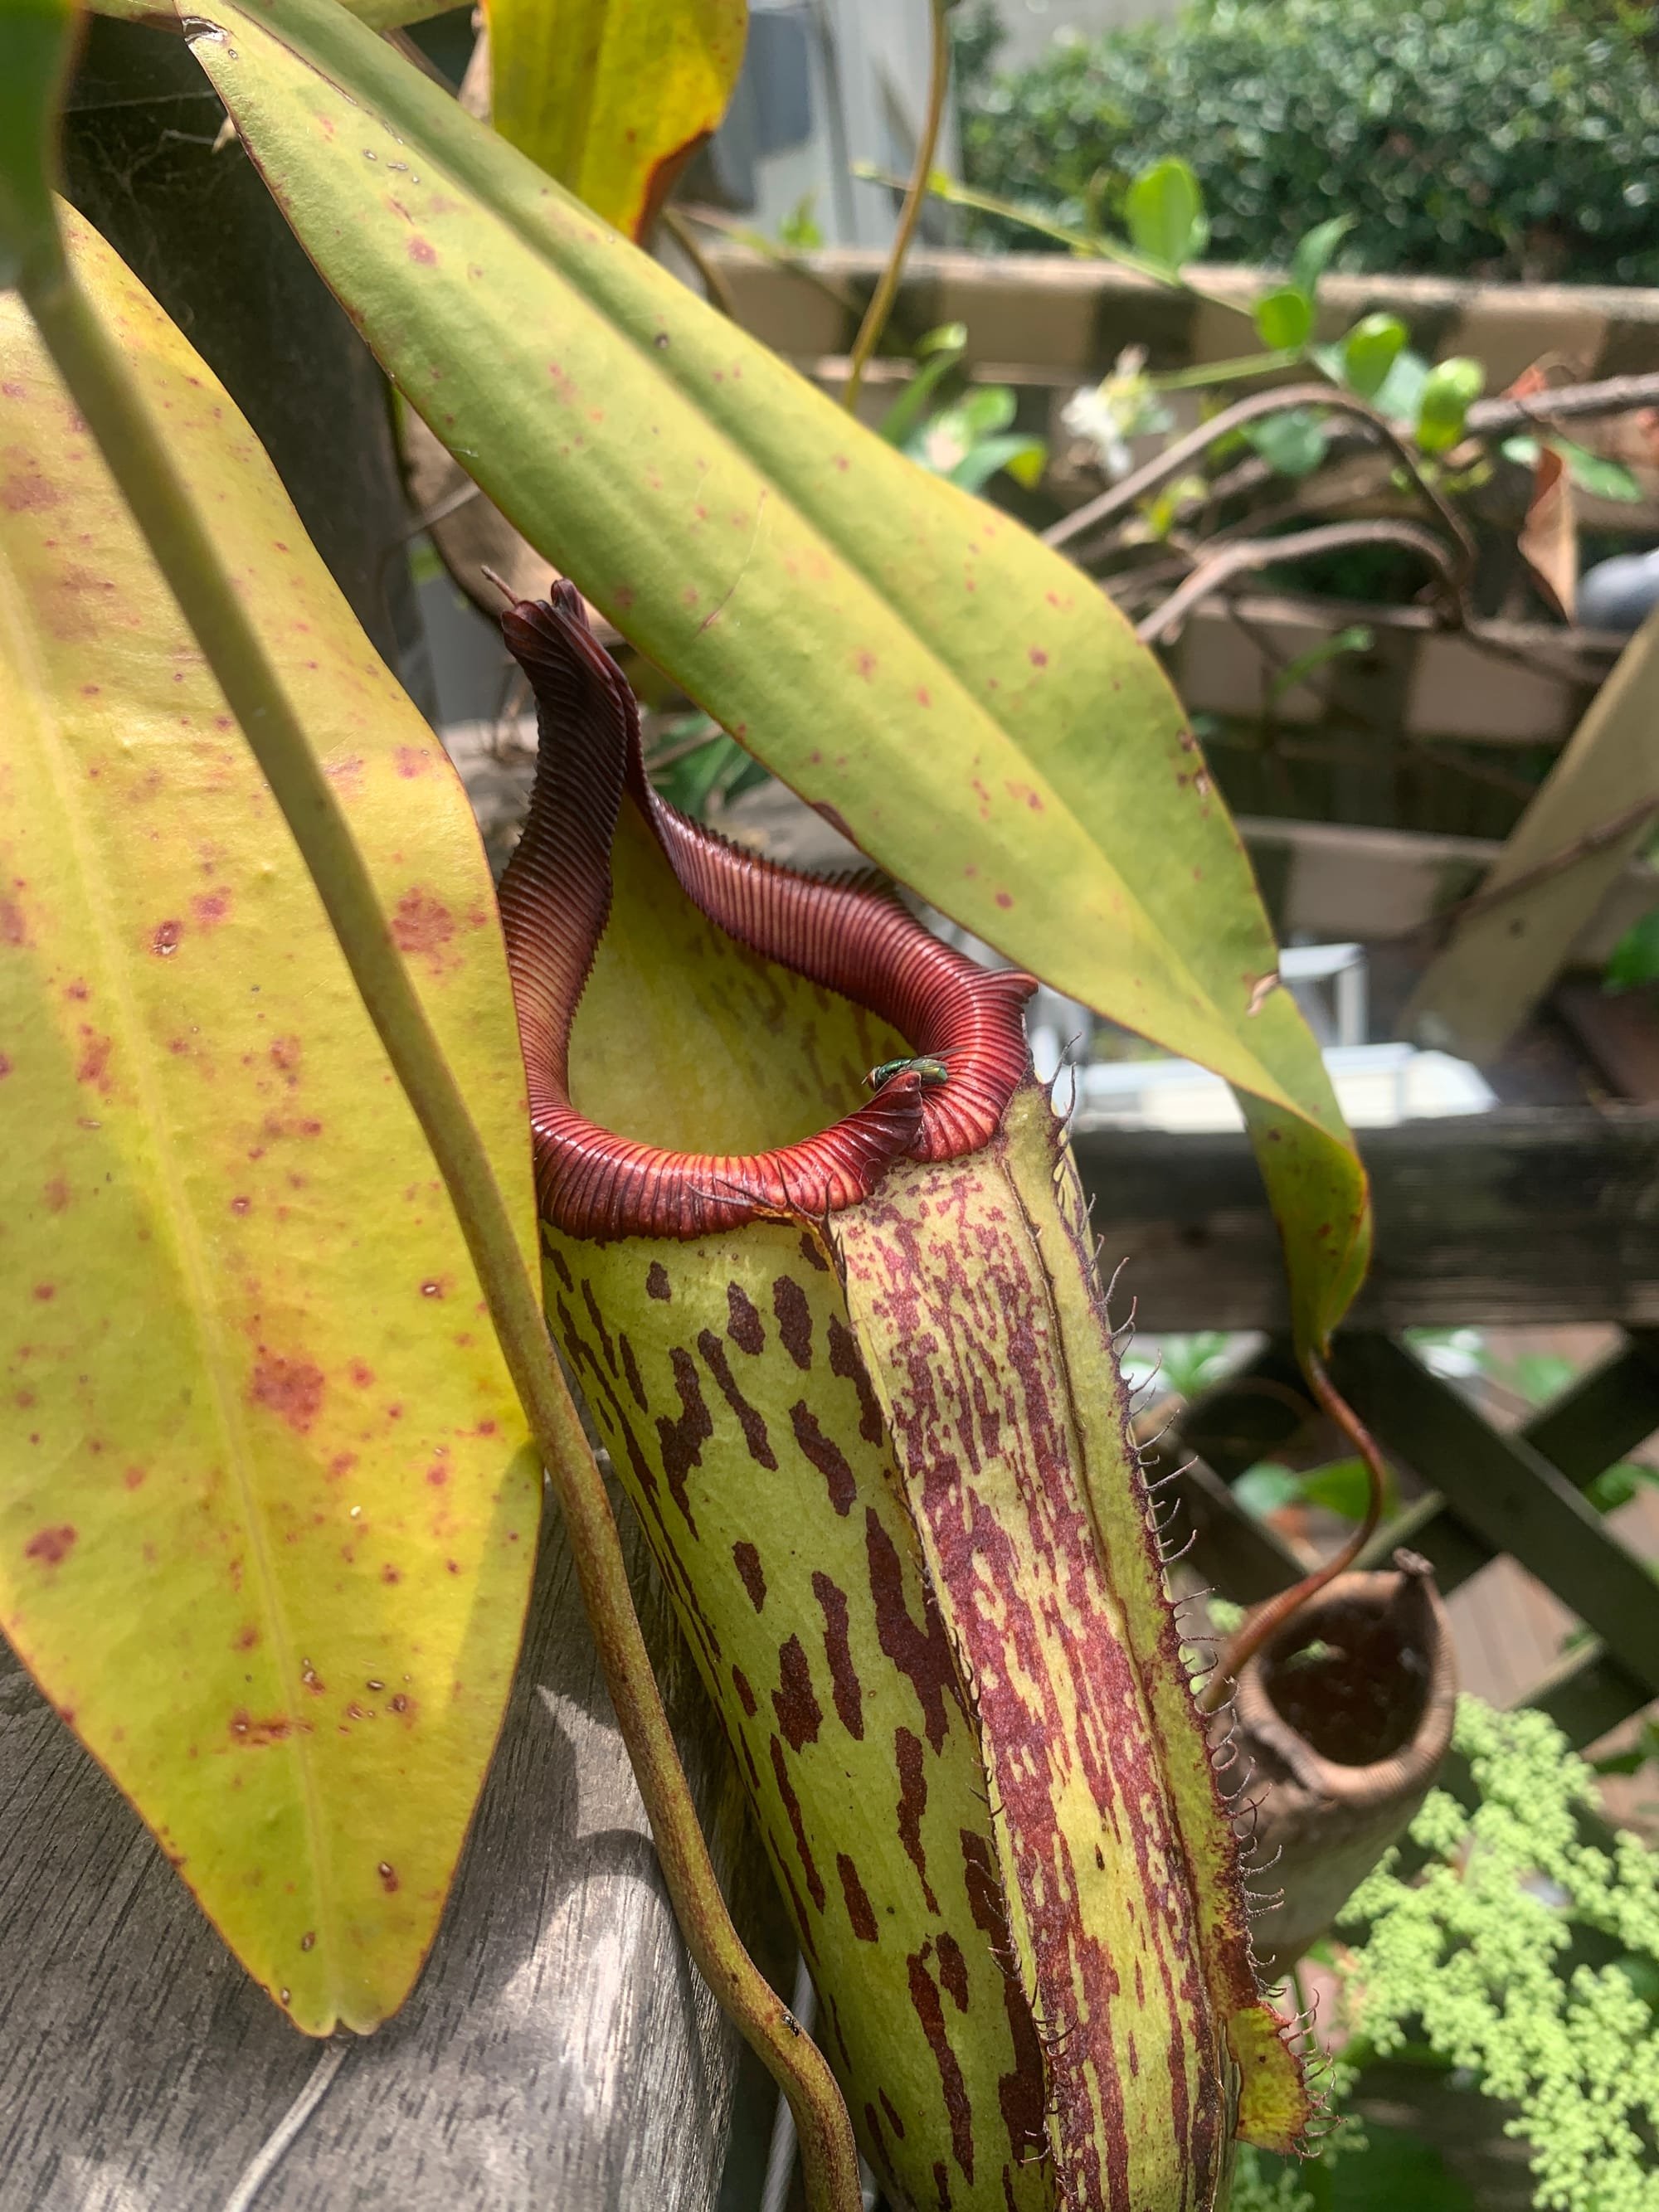 A fly getting eaten by a nepenthes gothica